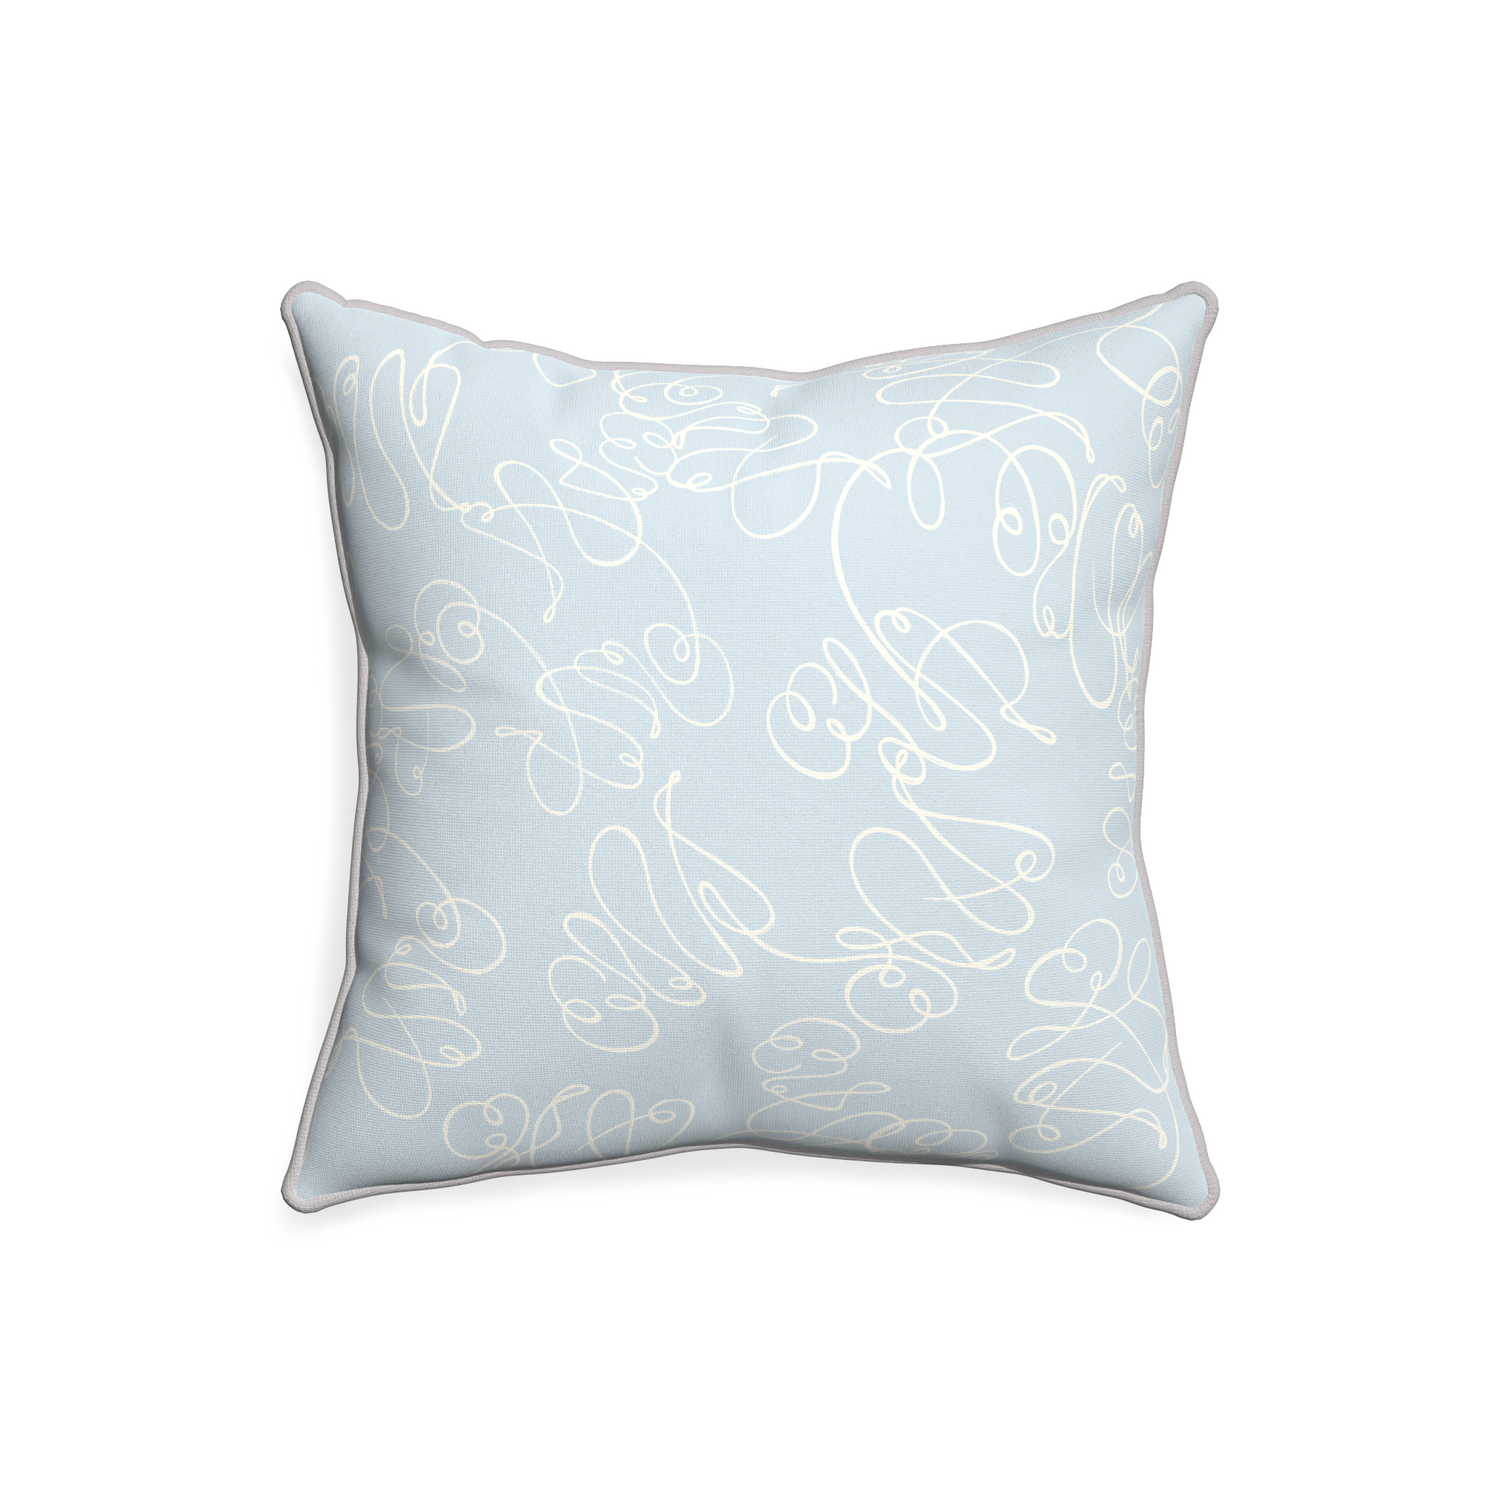 20-square mirabella custom pillow with pebble piping on white background